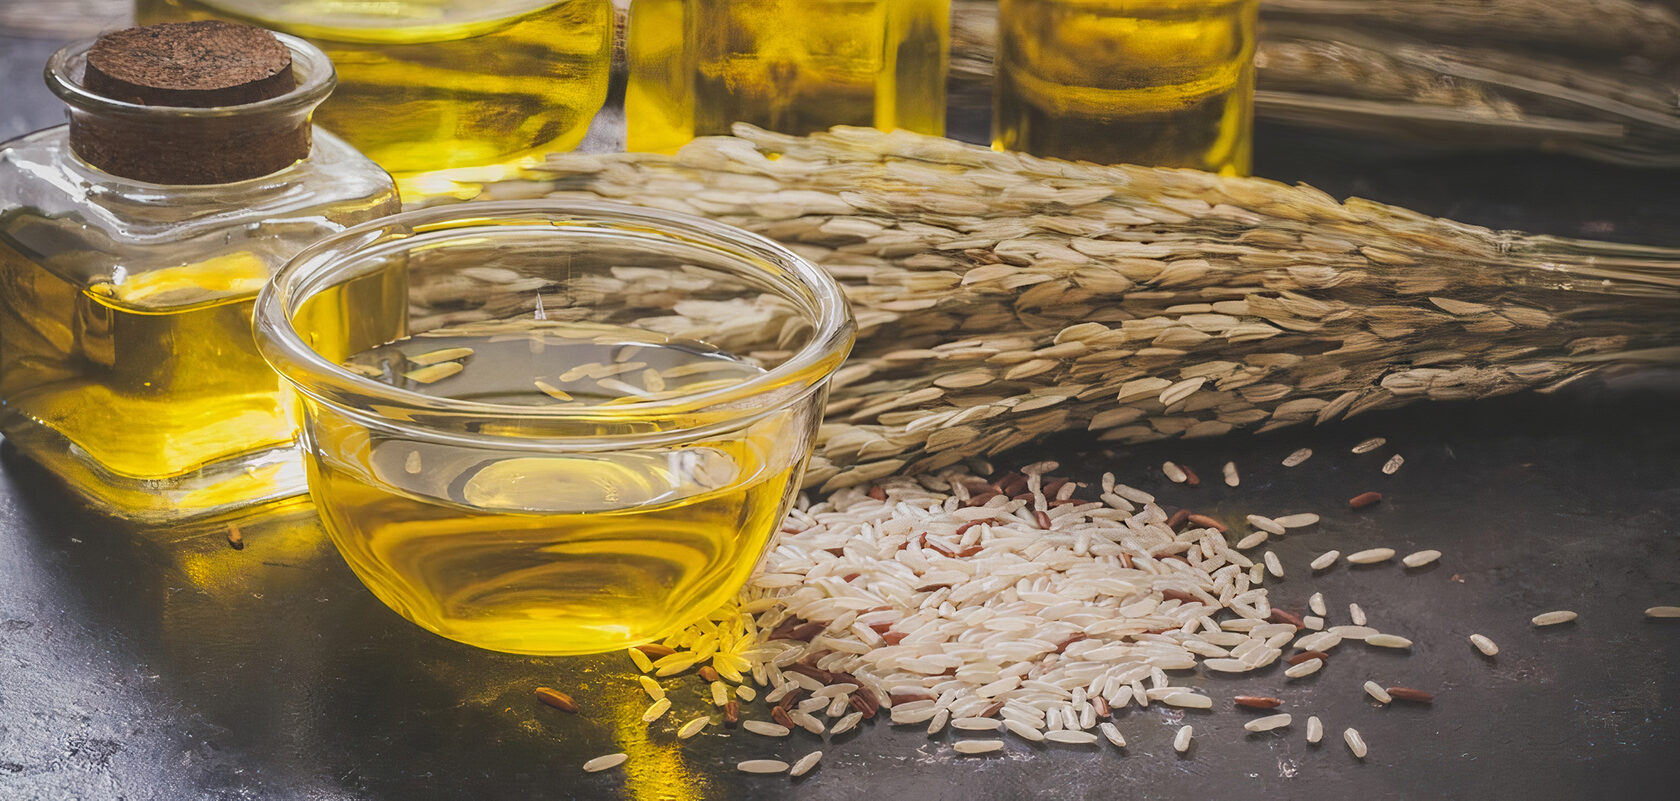 What are the benefits of rice oil?